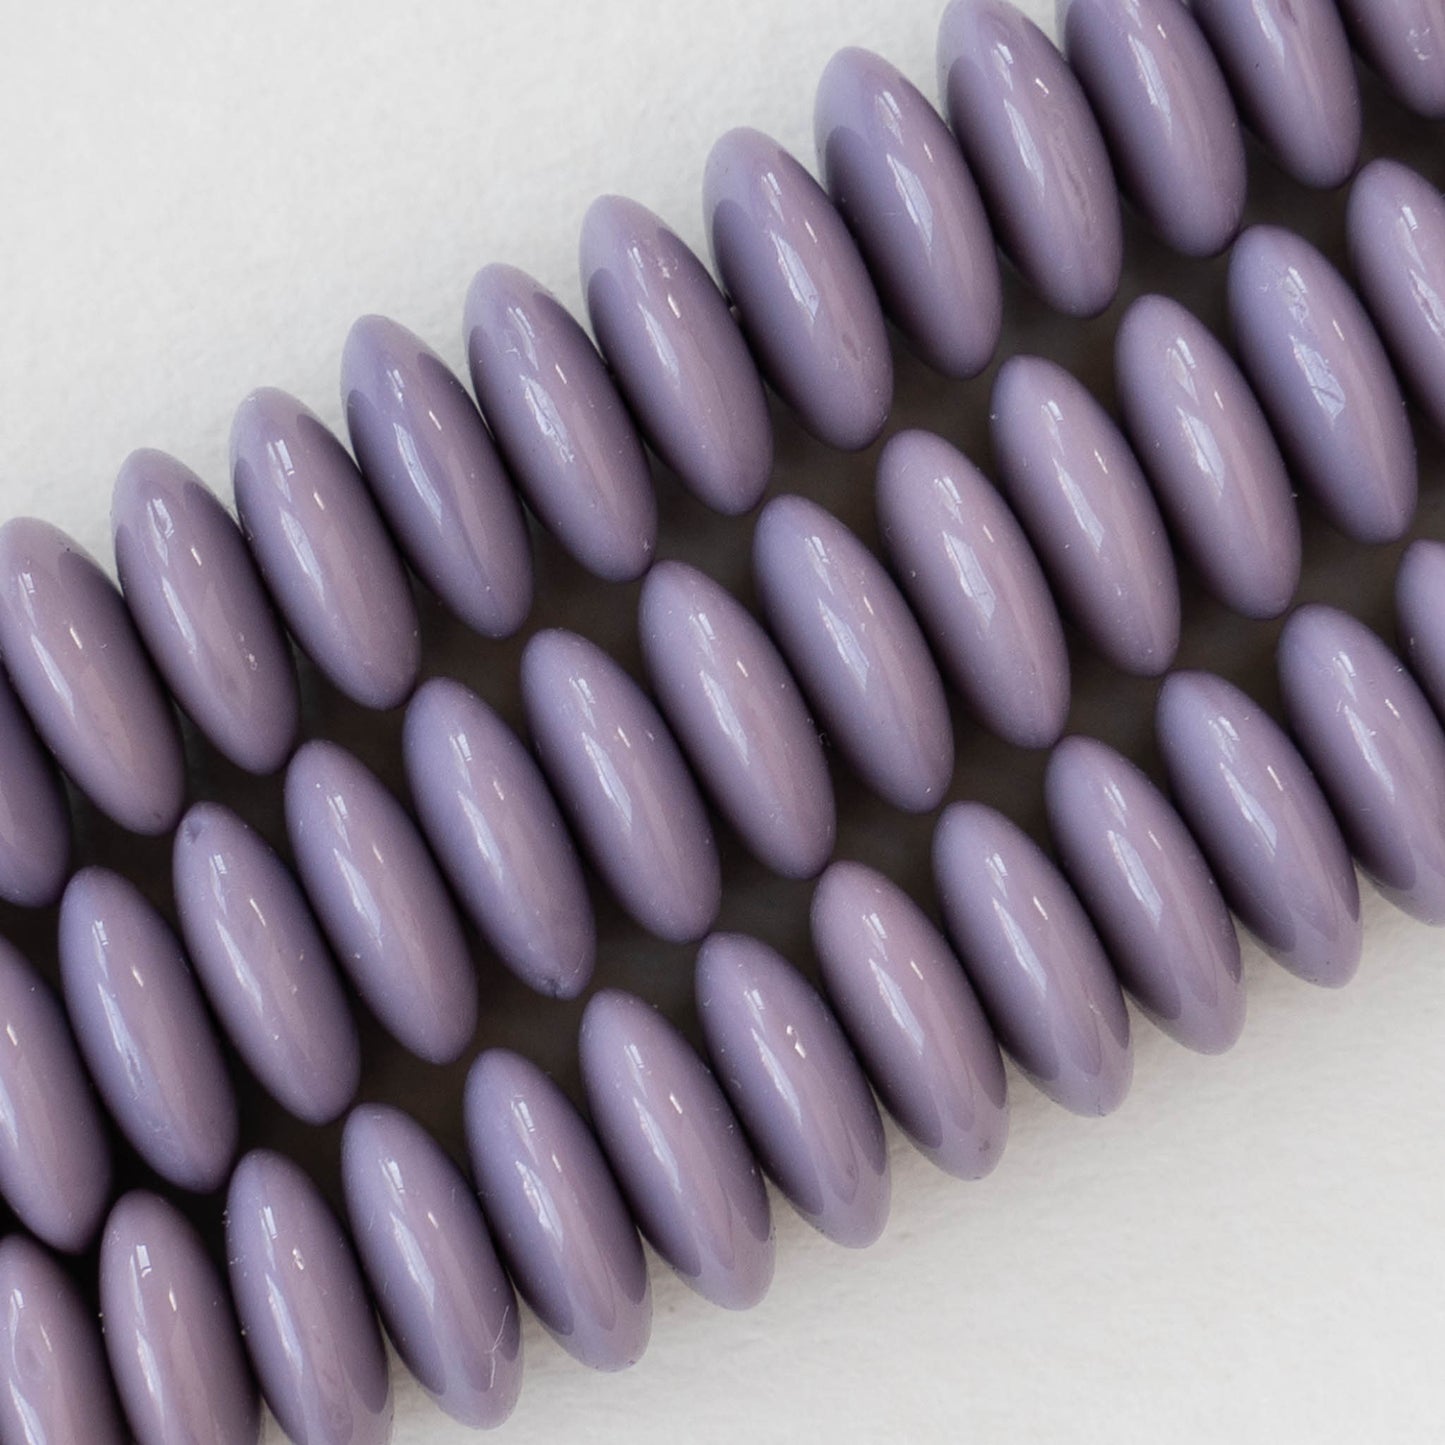 10mm Rondelle Beads - Opaque Lavender - 30 Beads